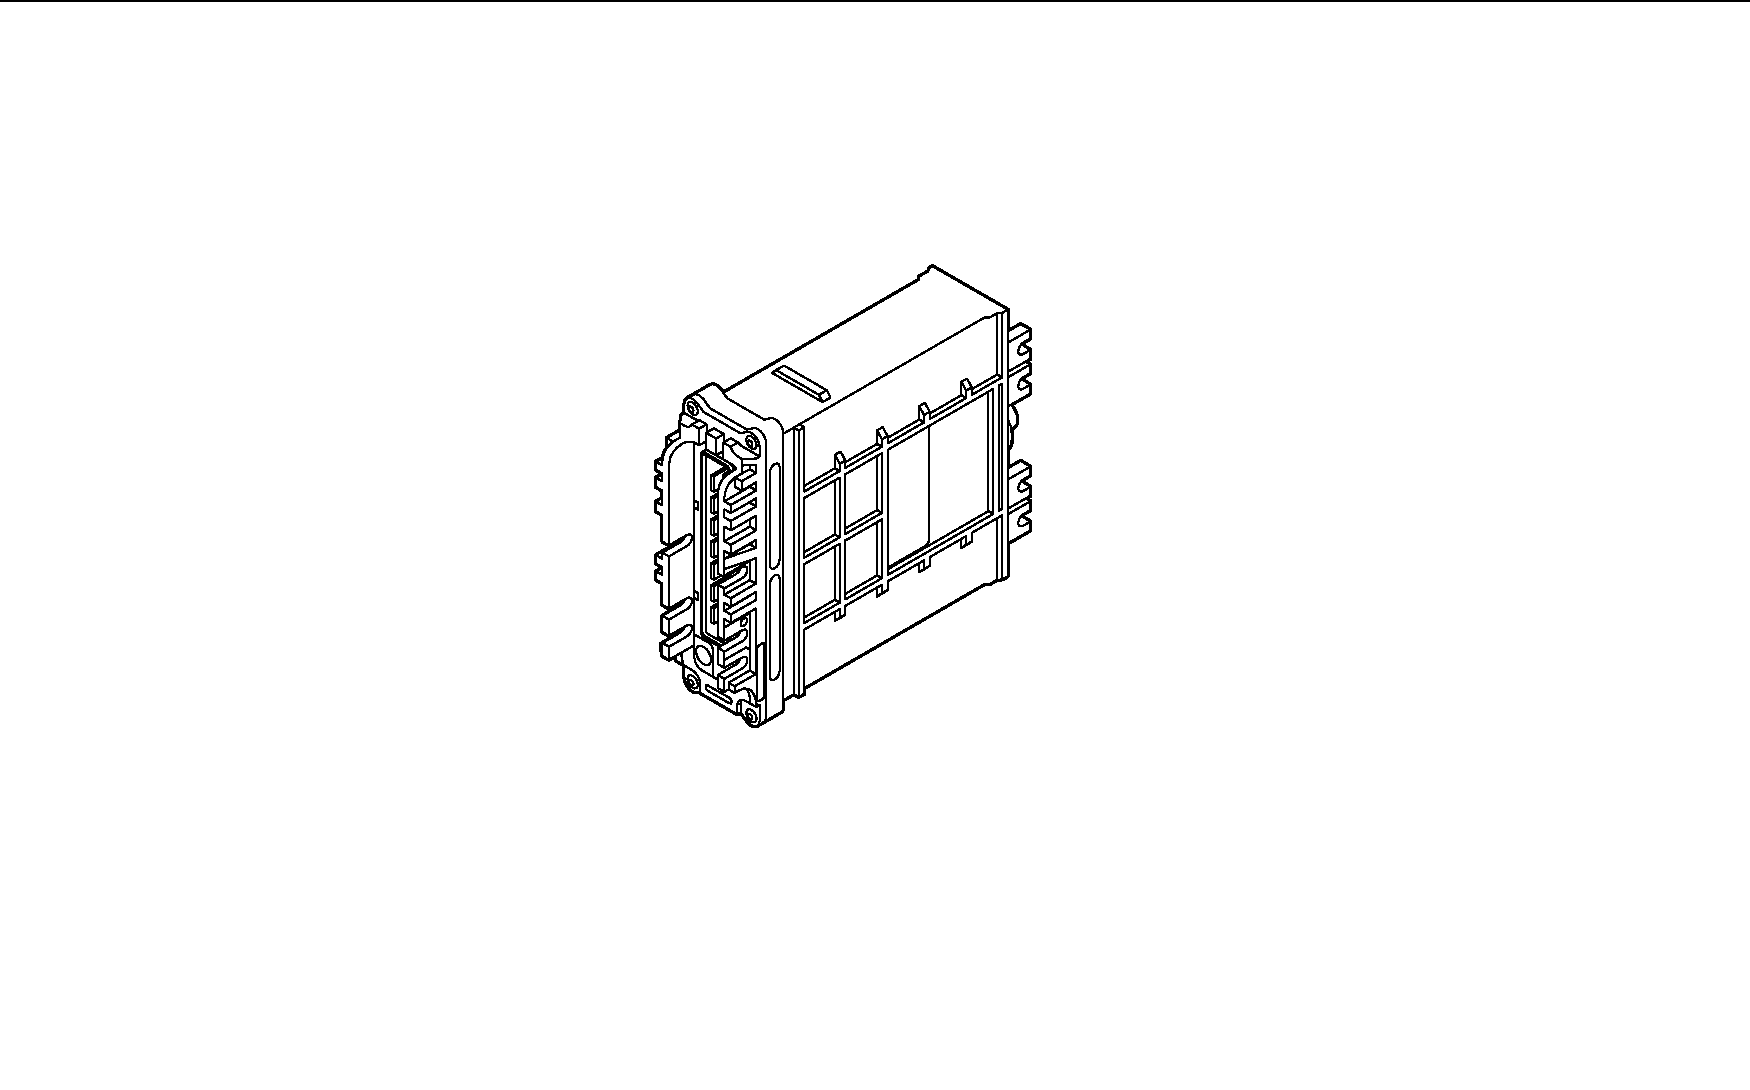 drawing for SCANIA 1460424 - EST 46 C (figure 2)